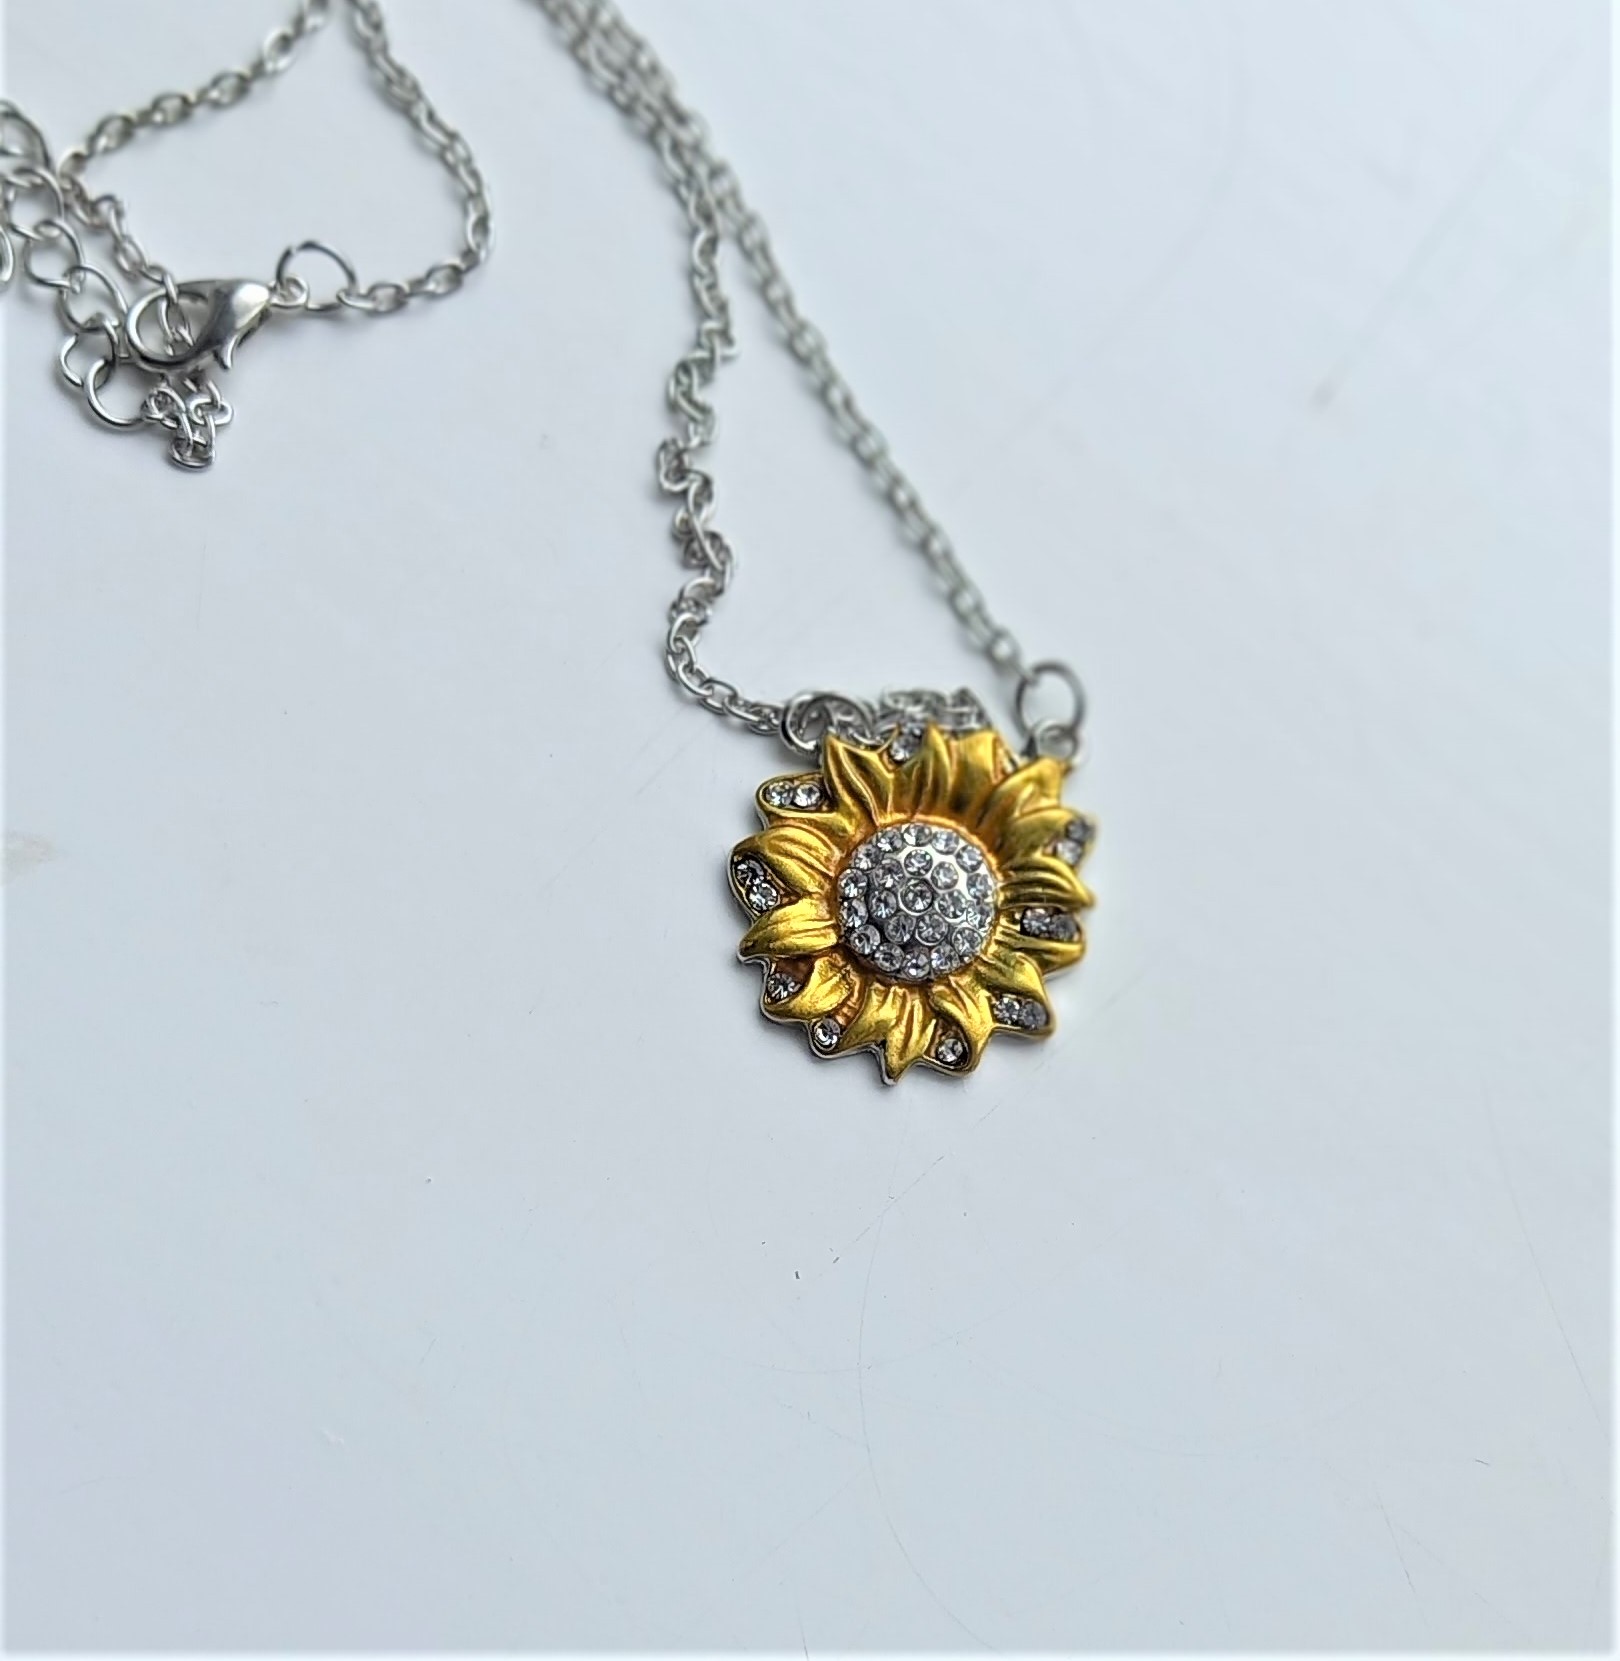 10 pcs - Sunflower Pendant Necklace Gold And Silver Tone With Crystals|GCC091|UK SELLER